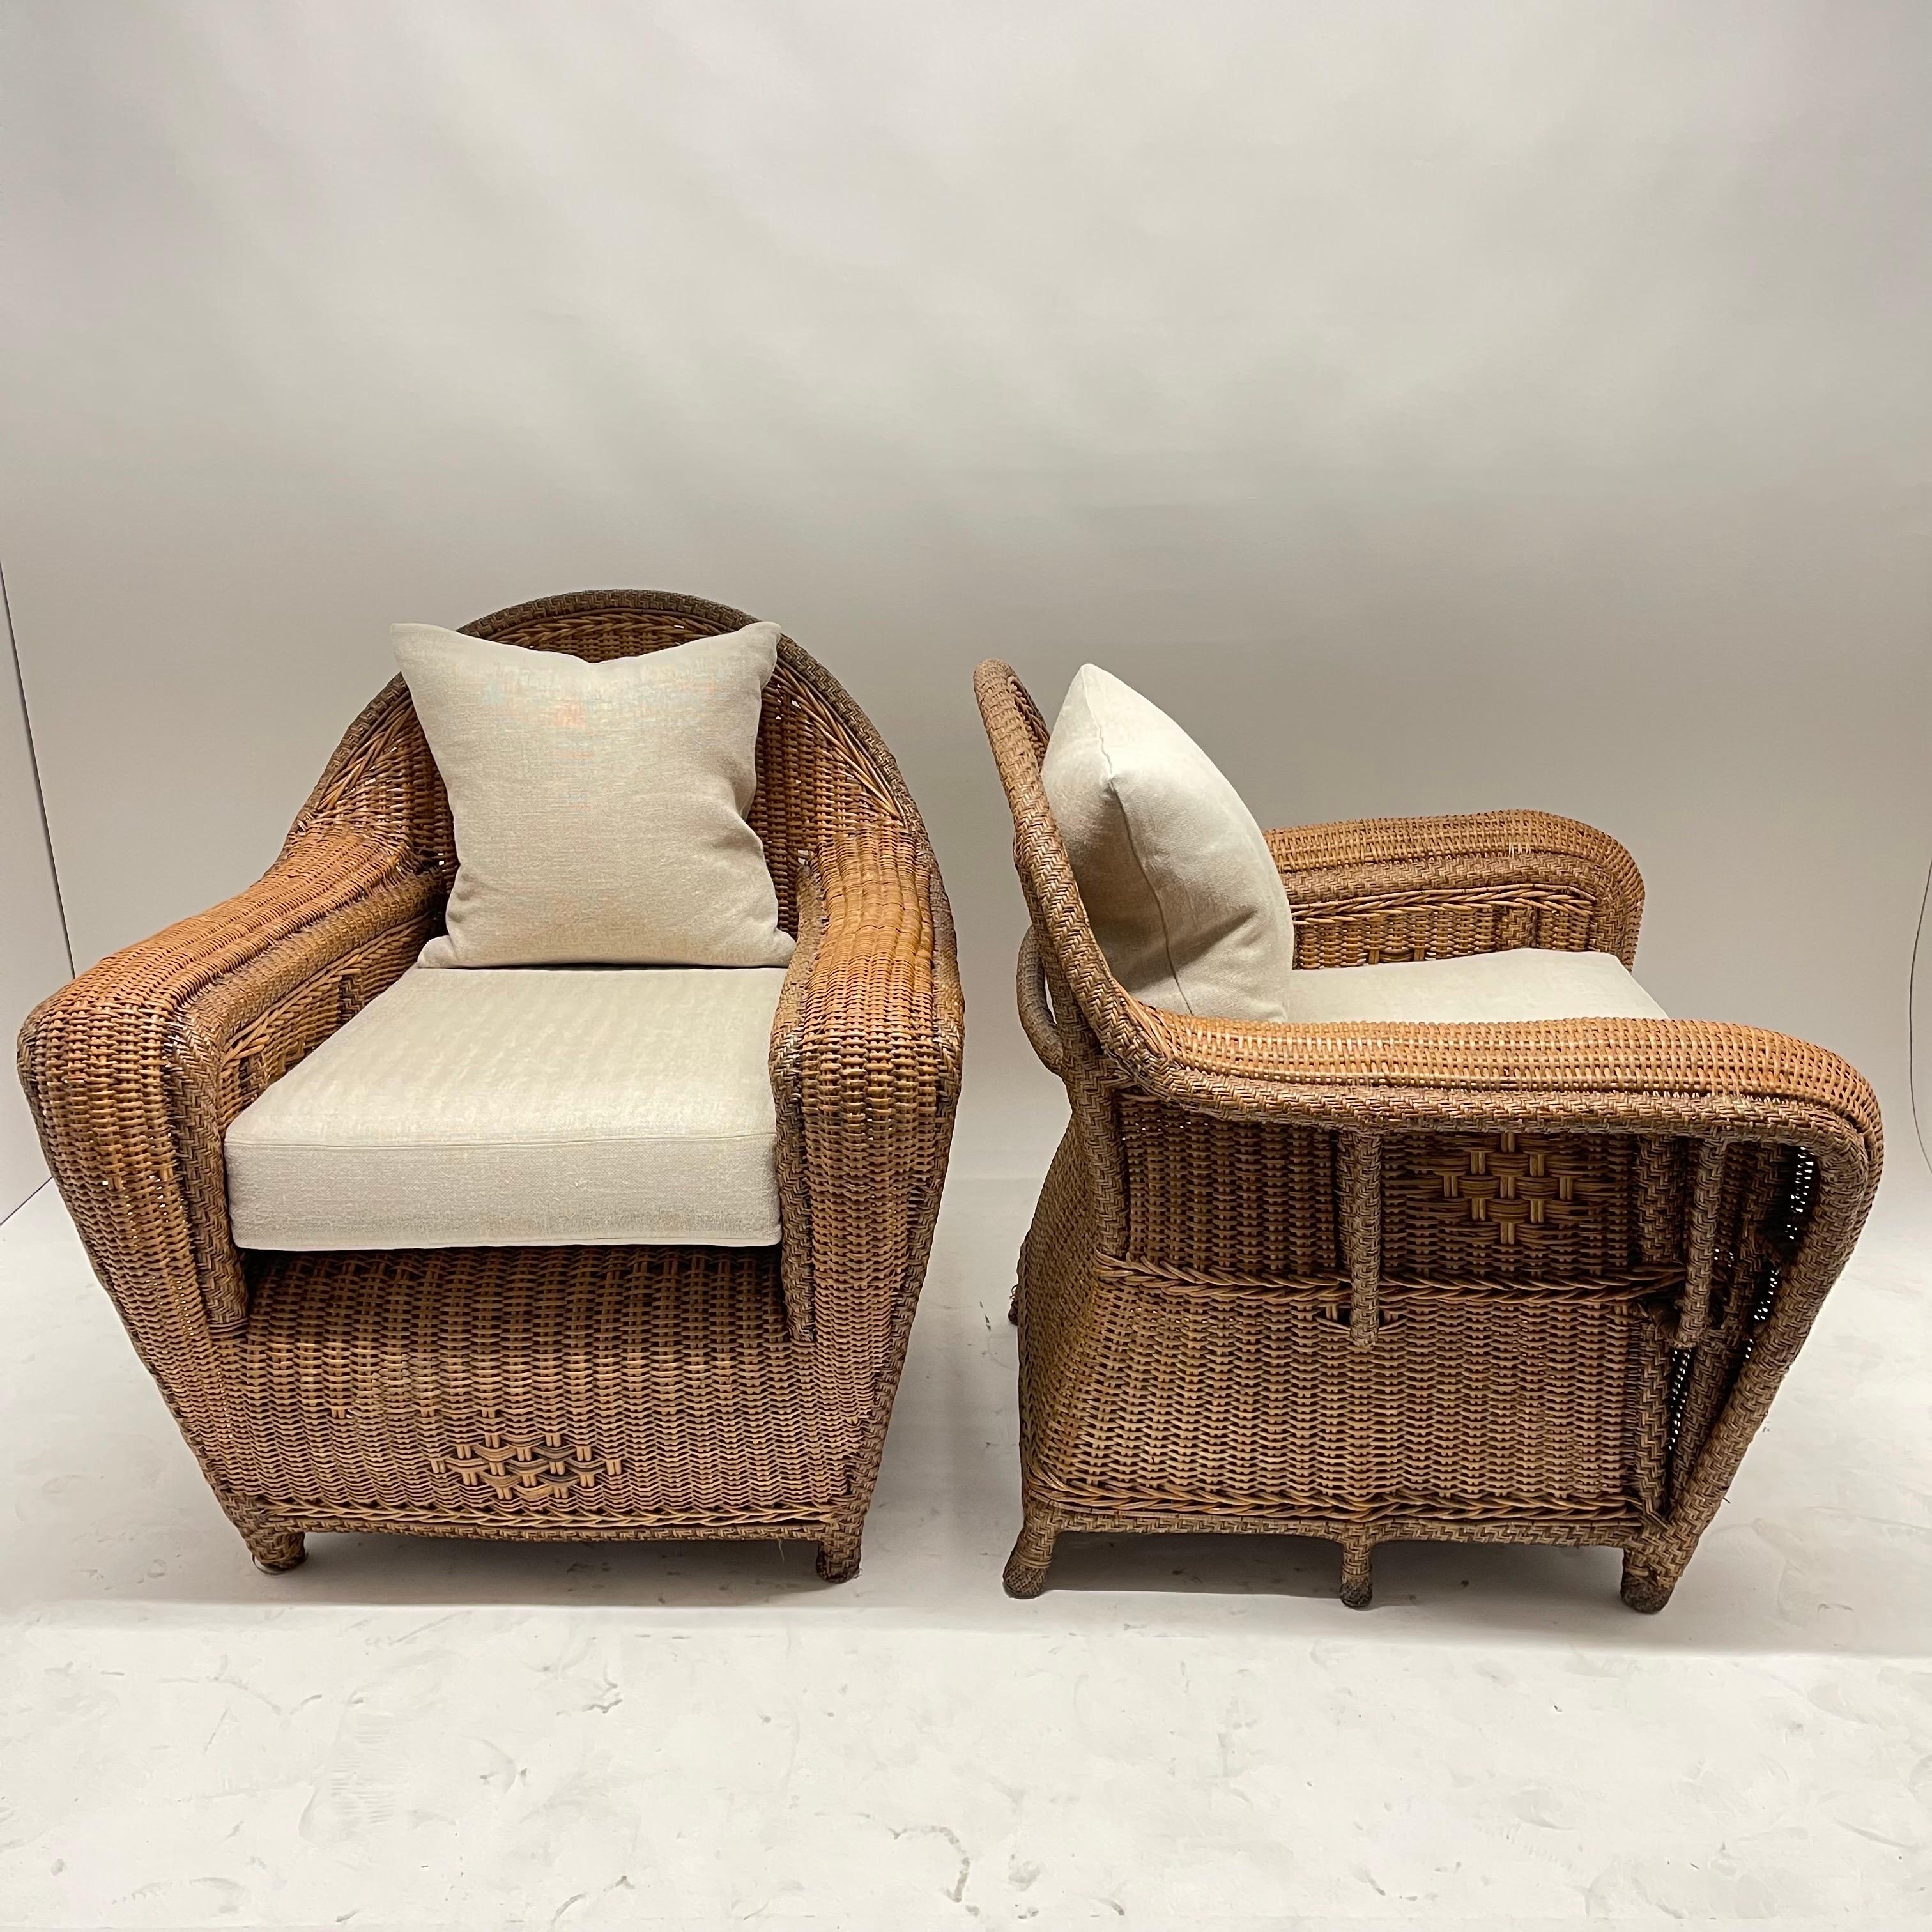 Rare pair of Art Deco wicker and rattan armchairs or club chairs with linen cushions and a down and linen back cushion, circa 1930s